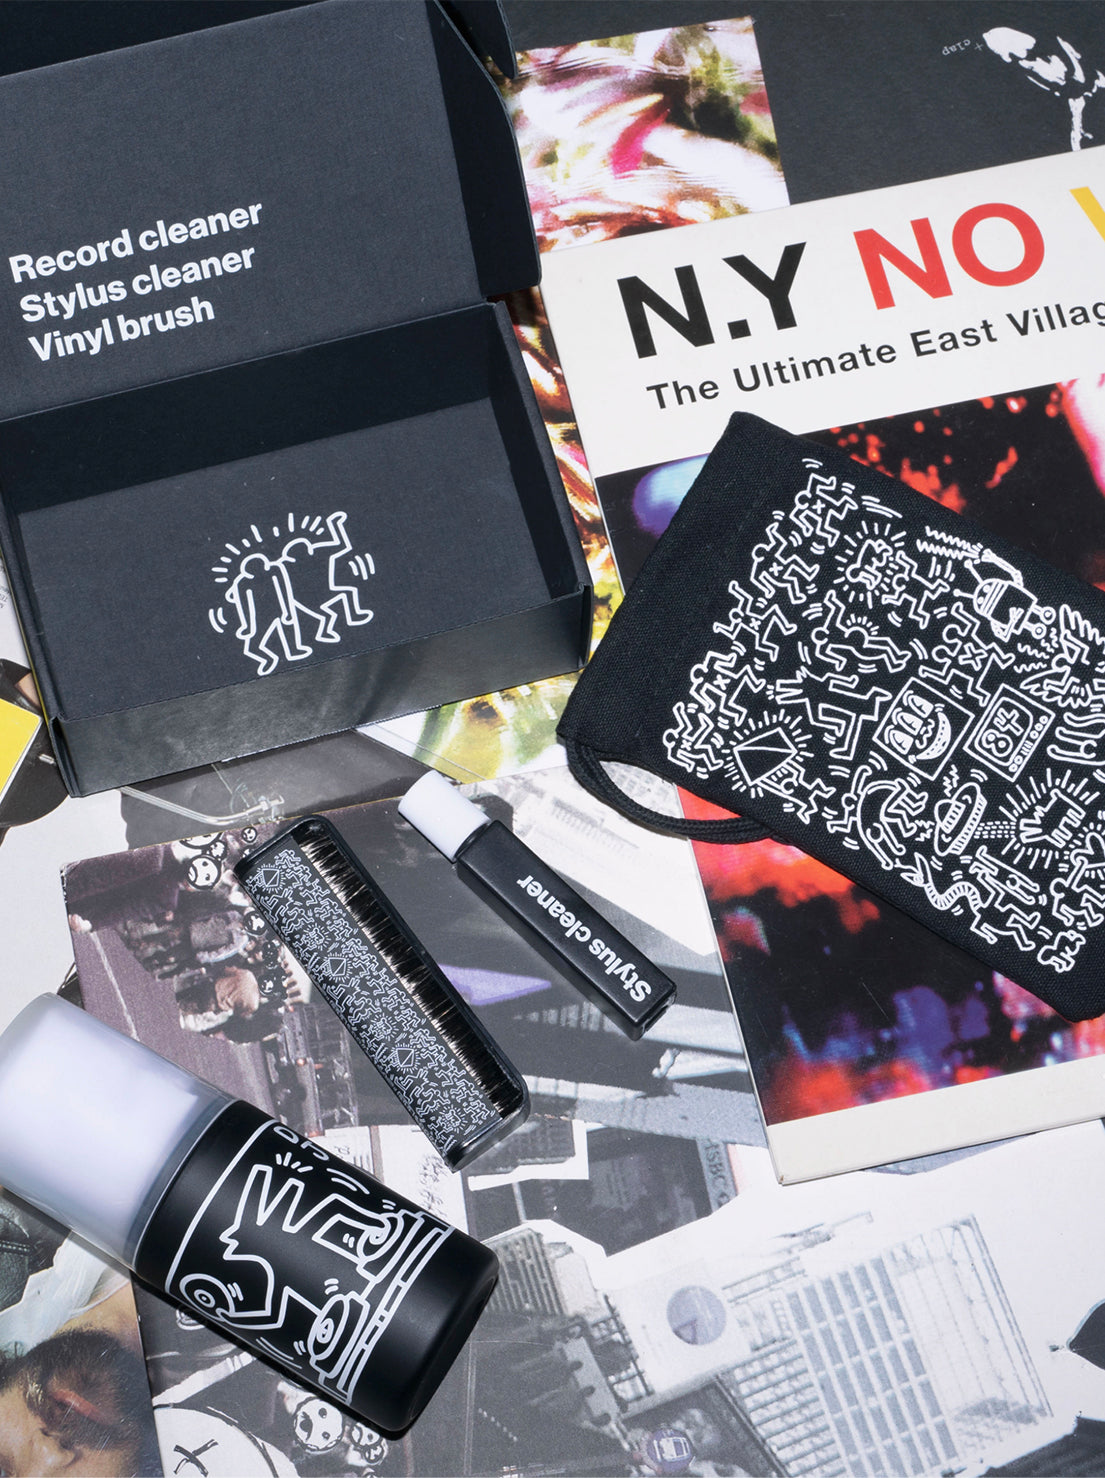 AM - Keith Haring Vinyl Cleaning Kit